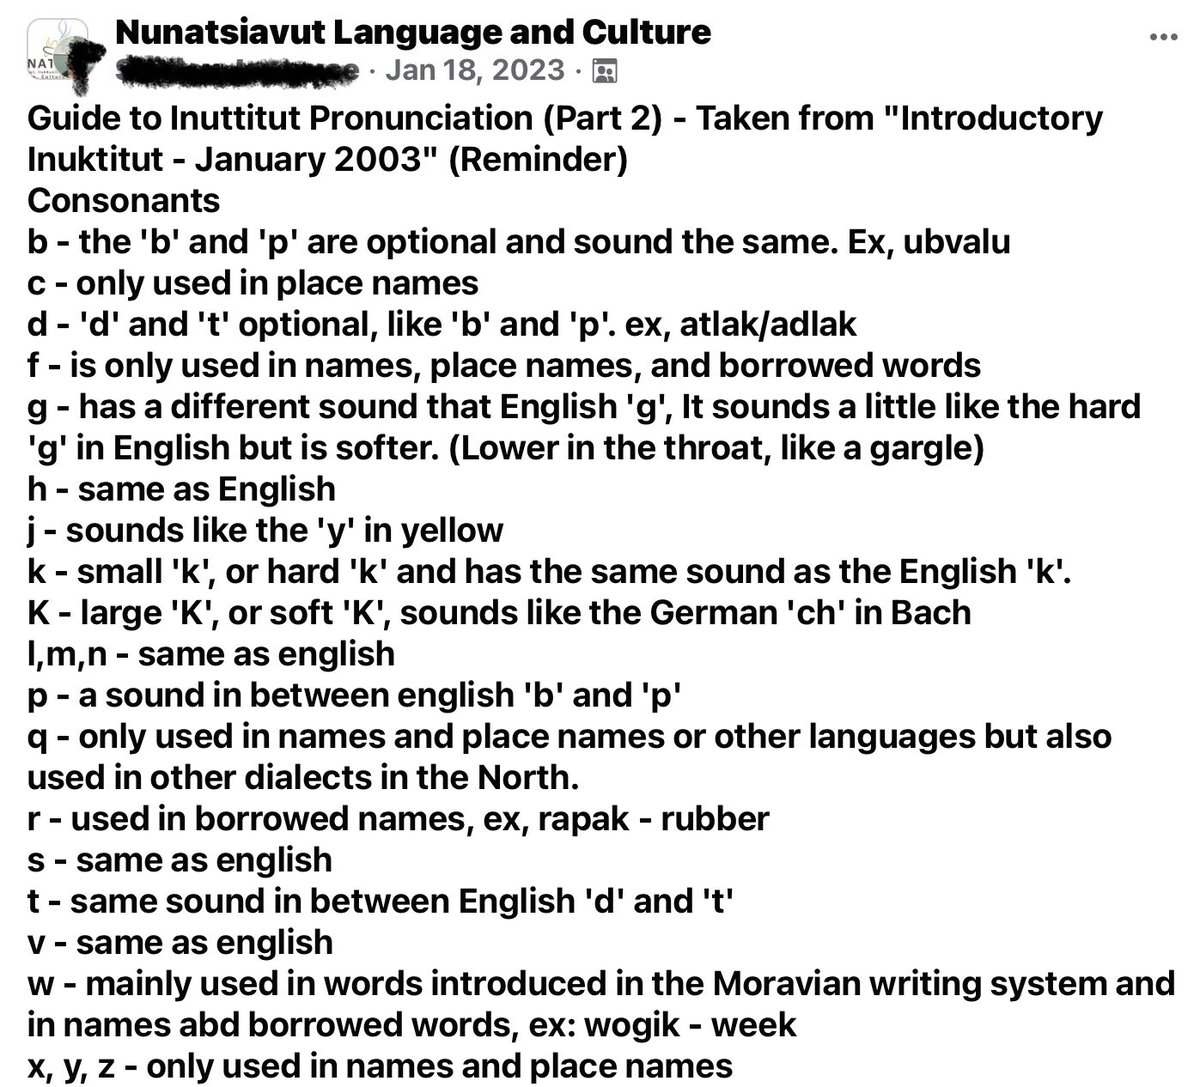 Hey @AndersenAngus, why are you teaching misinformation to your followers? Attached are 2 guides from the Nunatsiavut Language and Culture on Inuttitut pronunciation. Part 1 is on vowels and Part 2 is on consonants. Large K sounds like the German “ch” in 
Bach.